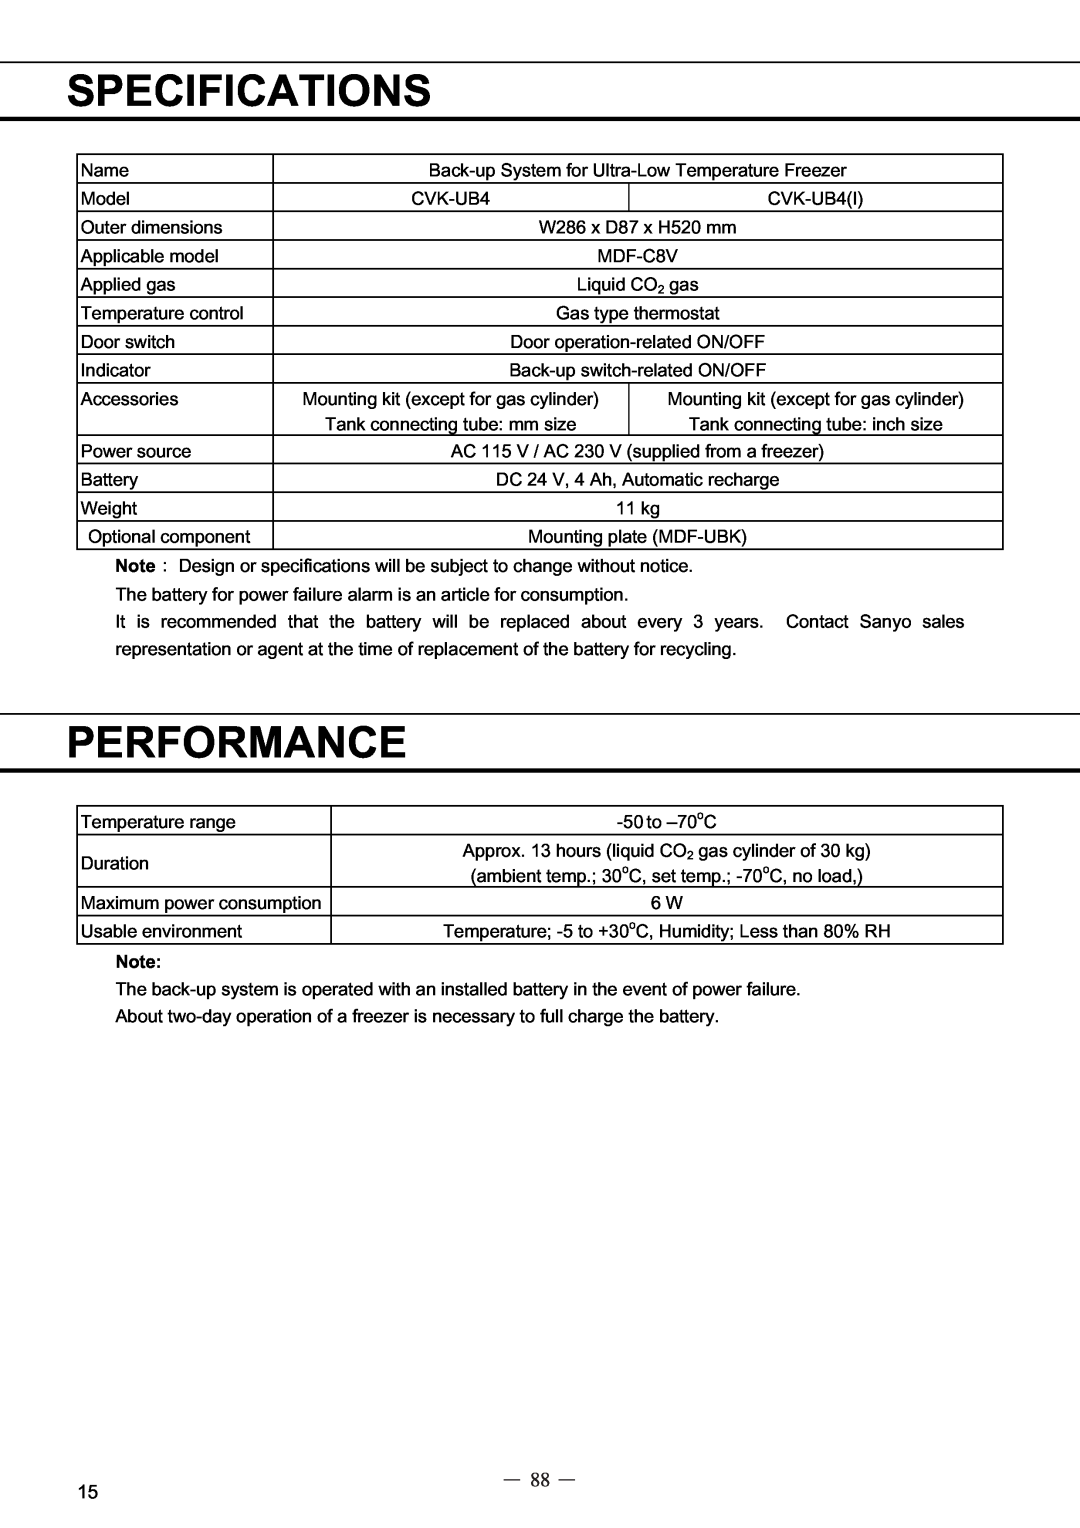 Sanyo MDF-C8V service manual Specifications, Performance, Name 